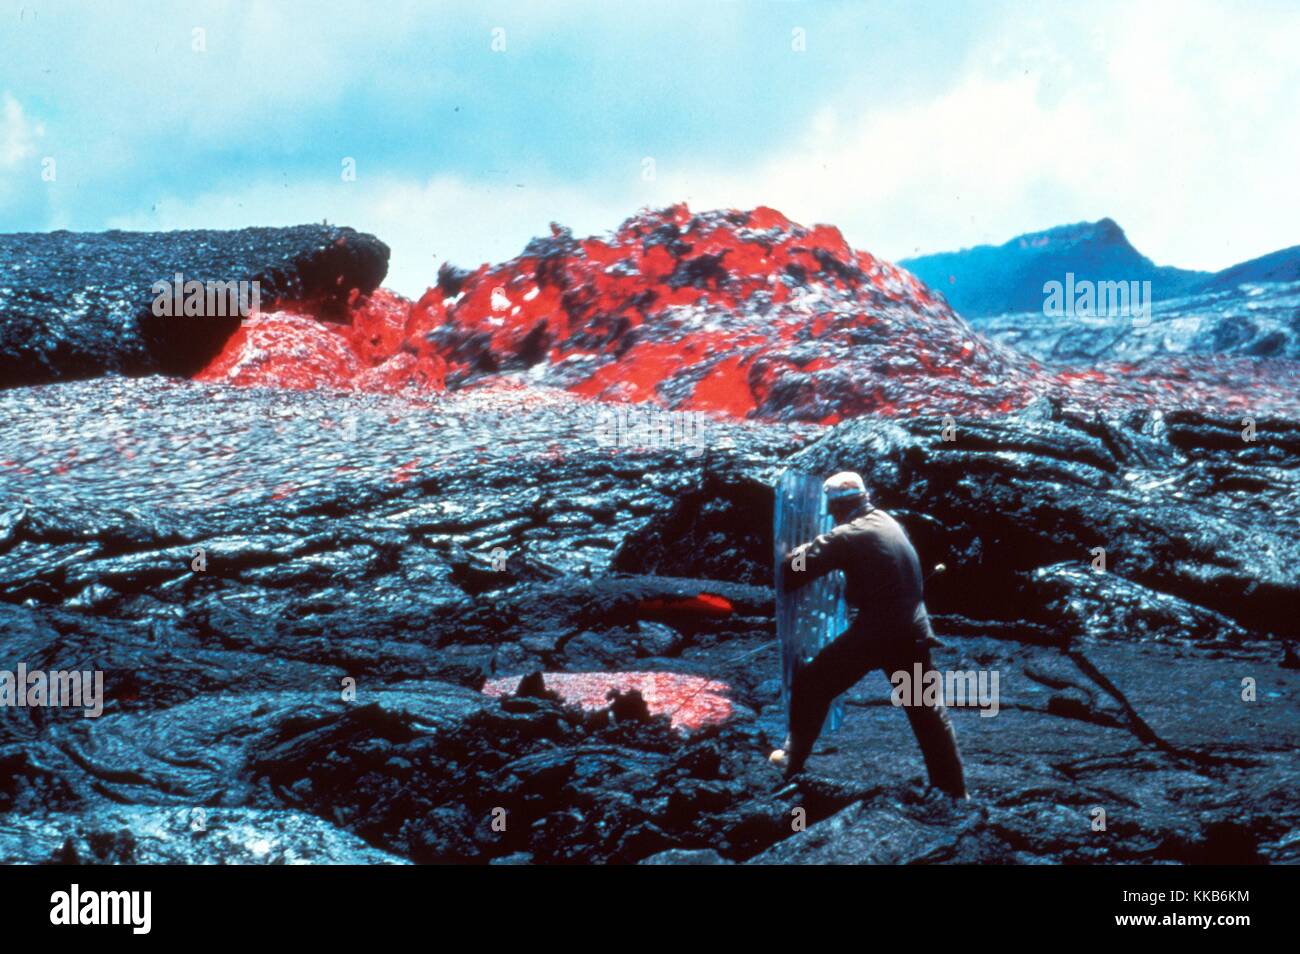 In Hawaii Volcanoes National Park, Ed Wolfe takes a temperature measurement on a sluggish channel eddy on Mt Kilauea which had begun erupting in 1983. Image courtesy P.W. Lipman/USGS. March 31, 1984. Stock Photo